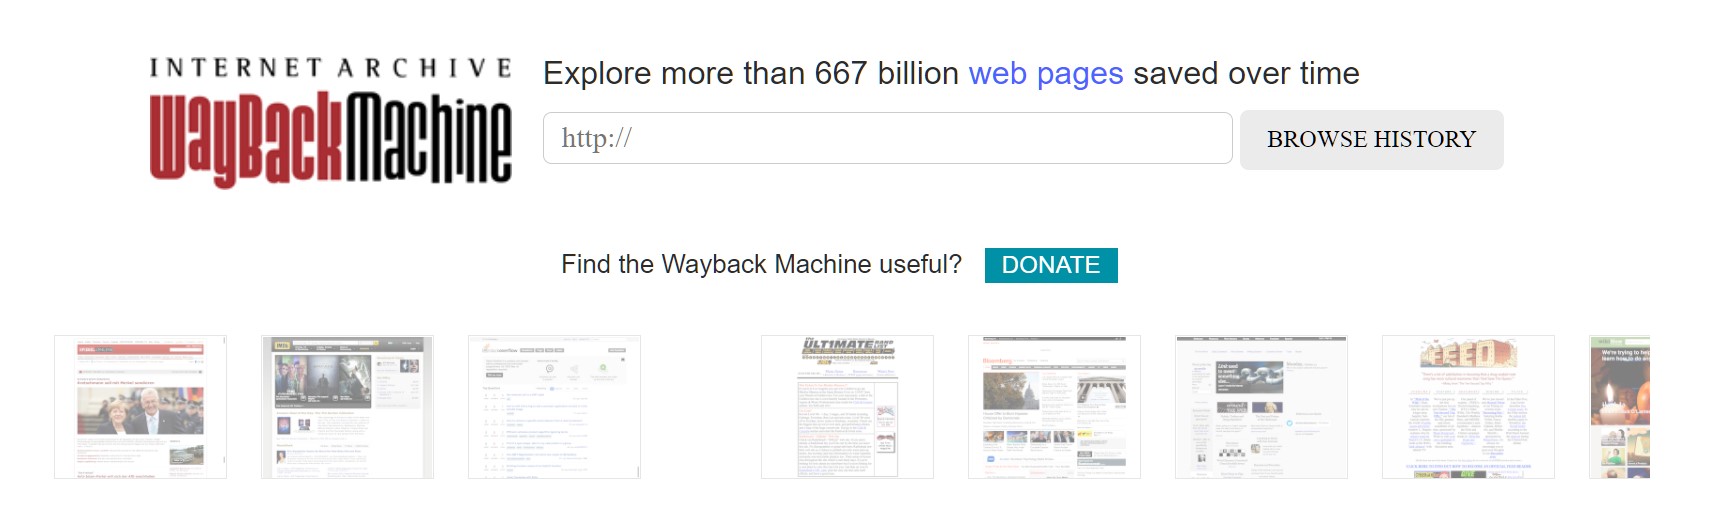 how to remove website from the Wayback Machine.